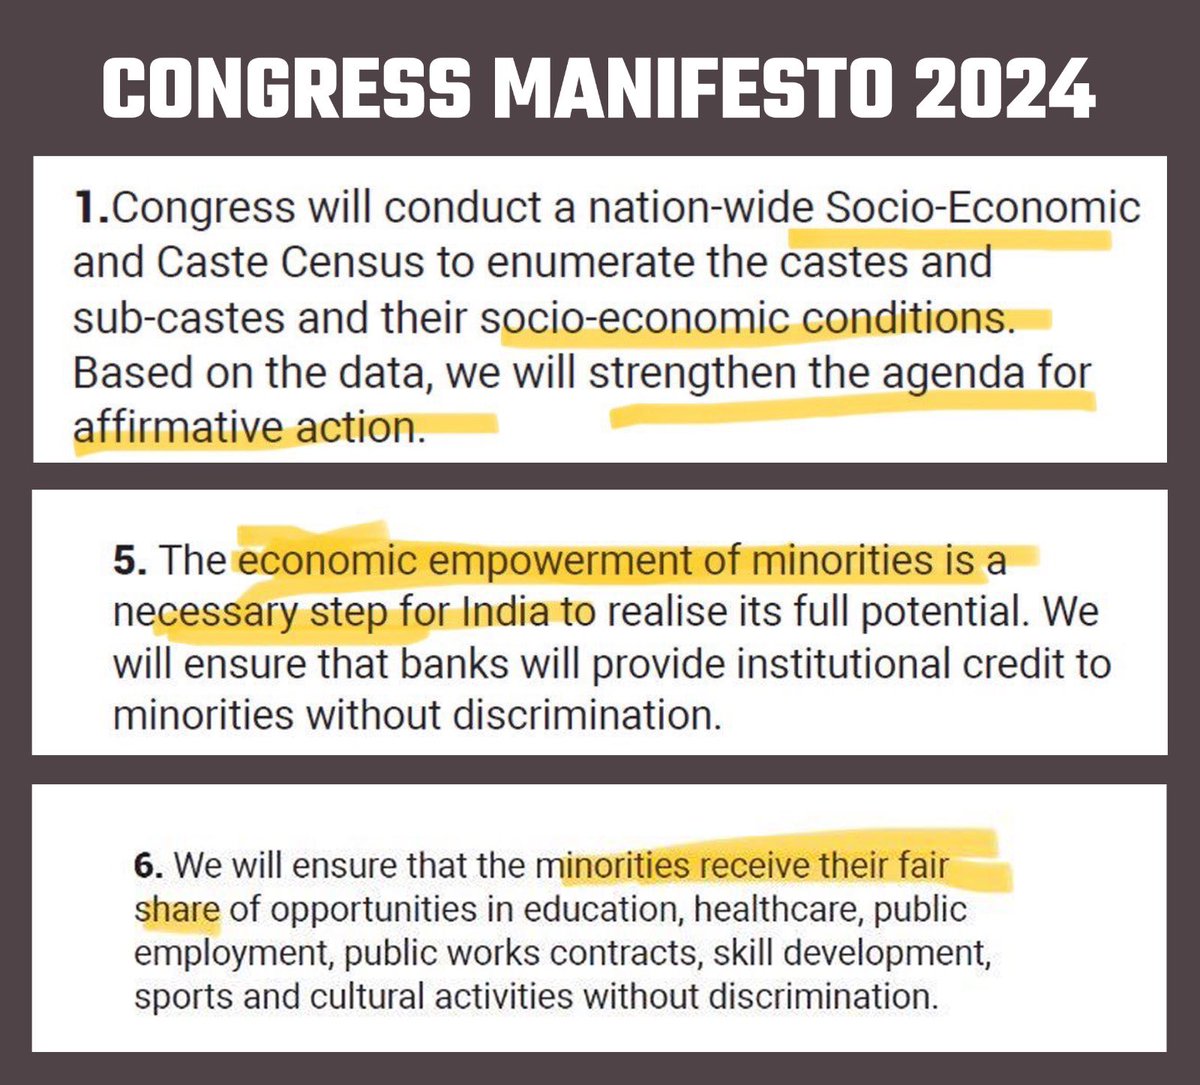 @iAnkurSingh Now connect this with the #CongressManifesto Clearly exposes the idea of appeasement, ignoring all others for One vote bank. Clearly for congressi 'Muslims are a vote bank'. 1) Empowerment of Minorities (only to Muslims) 2) minorities (only Muslims) receive opportunities